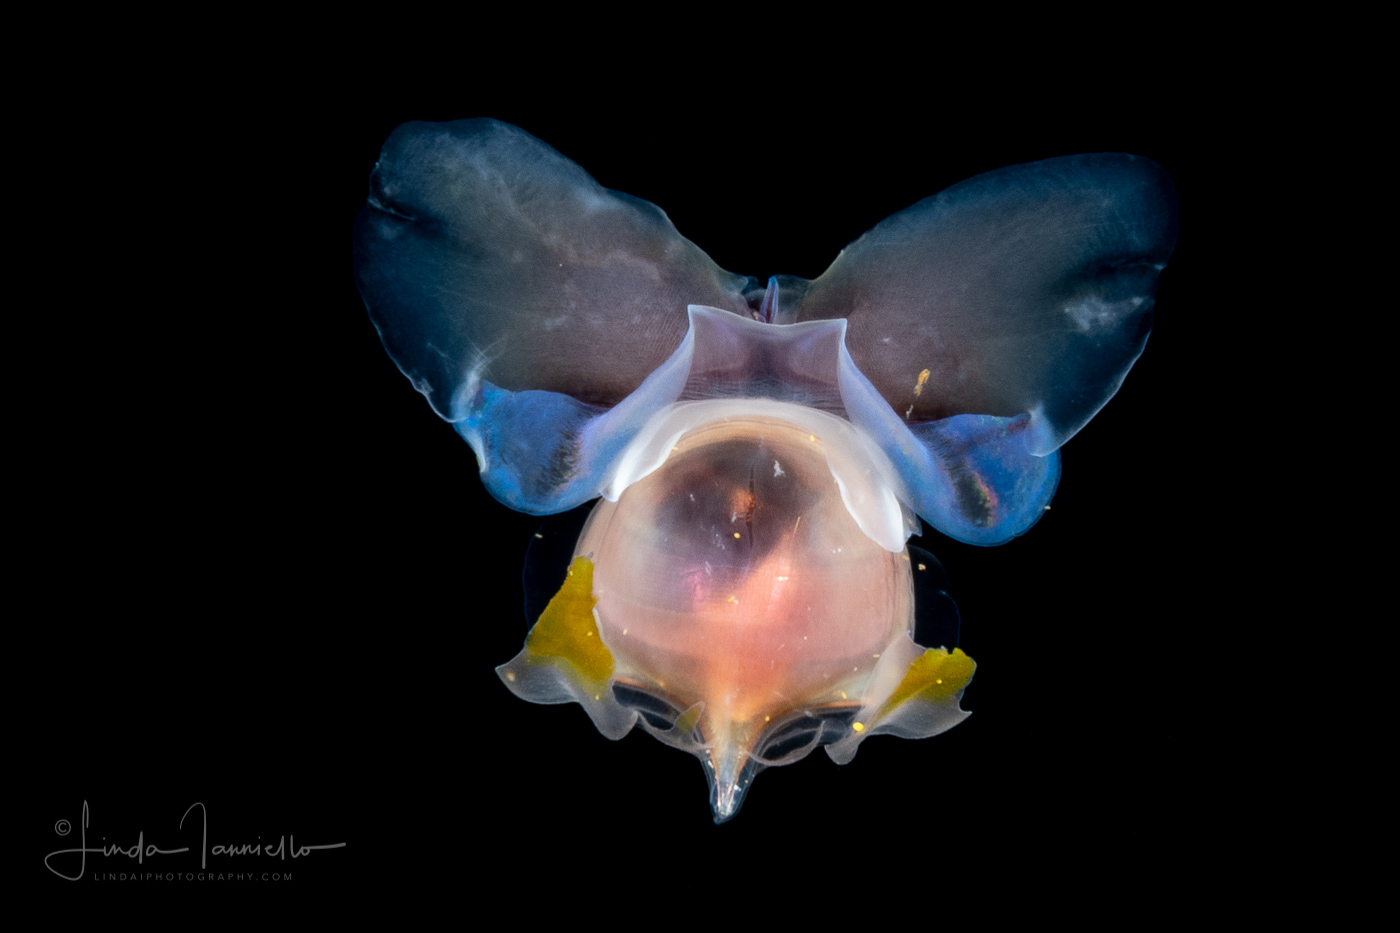 Sea Butterfly - Pteropoda - Euthecosomata - Cavolinia tridentata - With Green Mantle Appendages